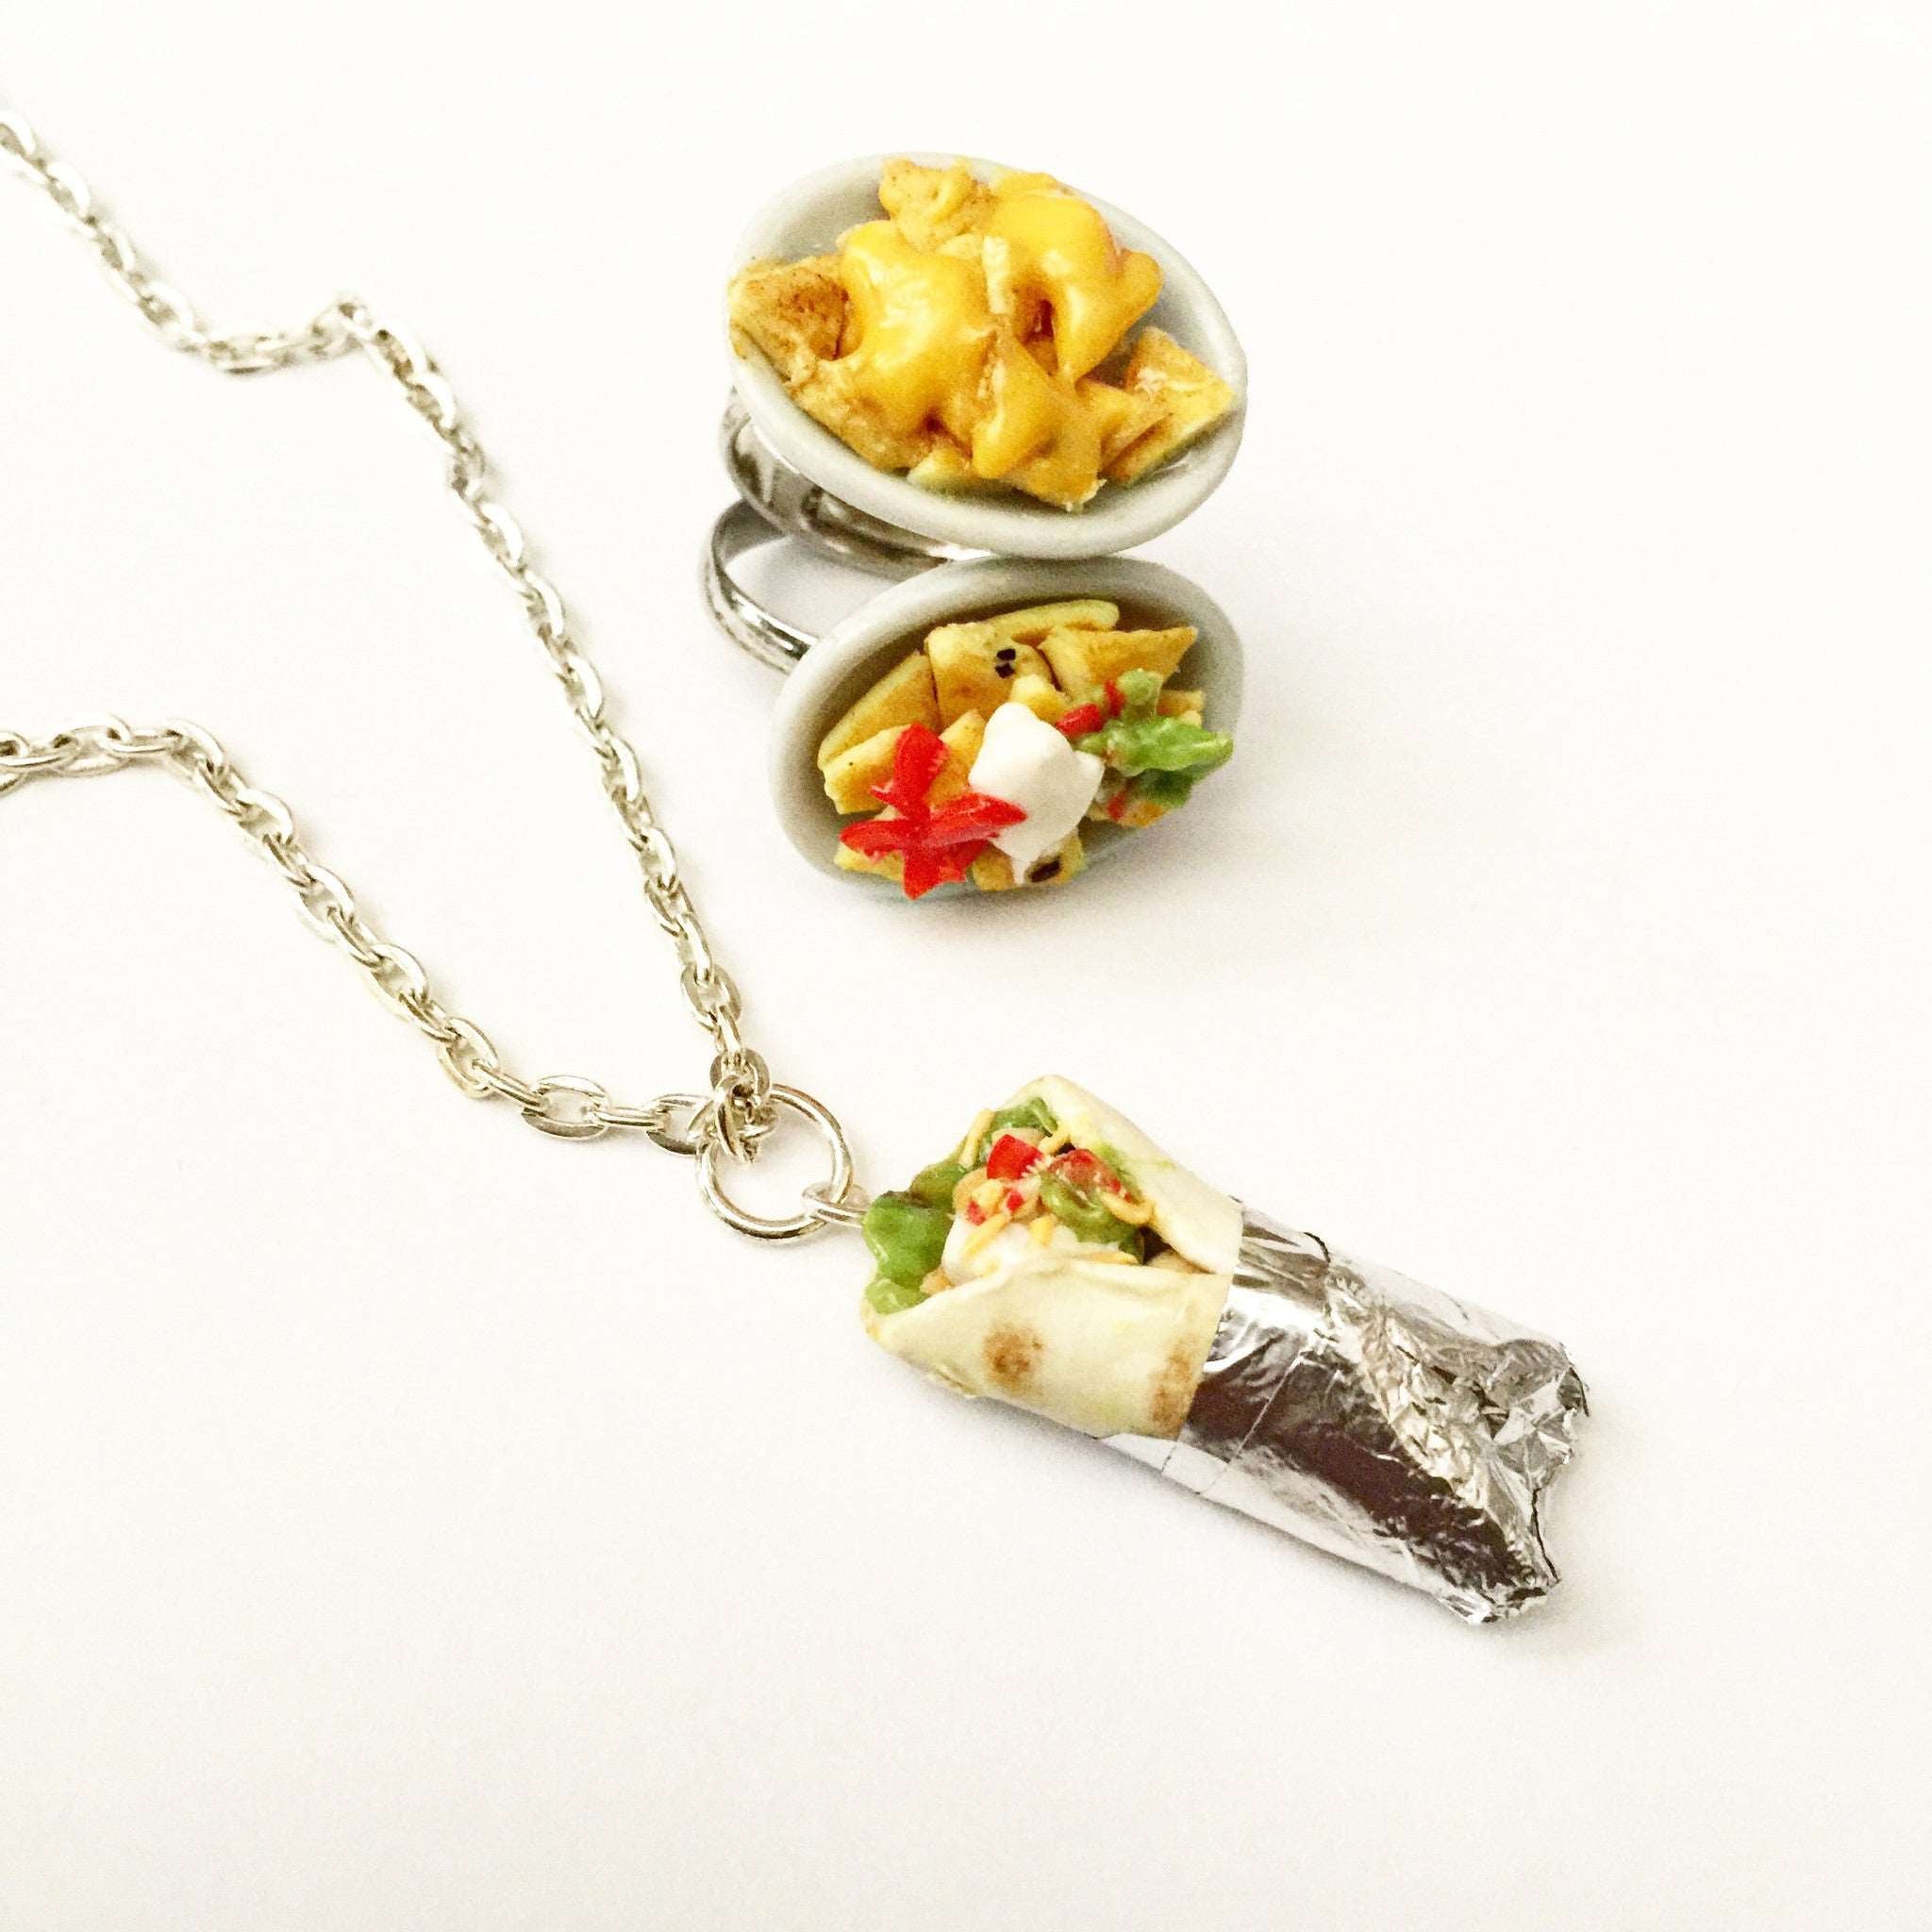 Burrito Necklace - Jillicious charms and accessories